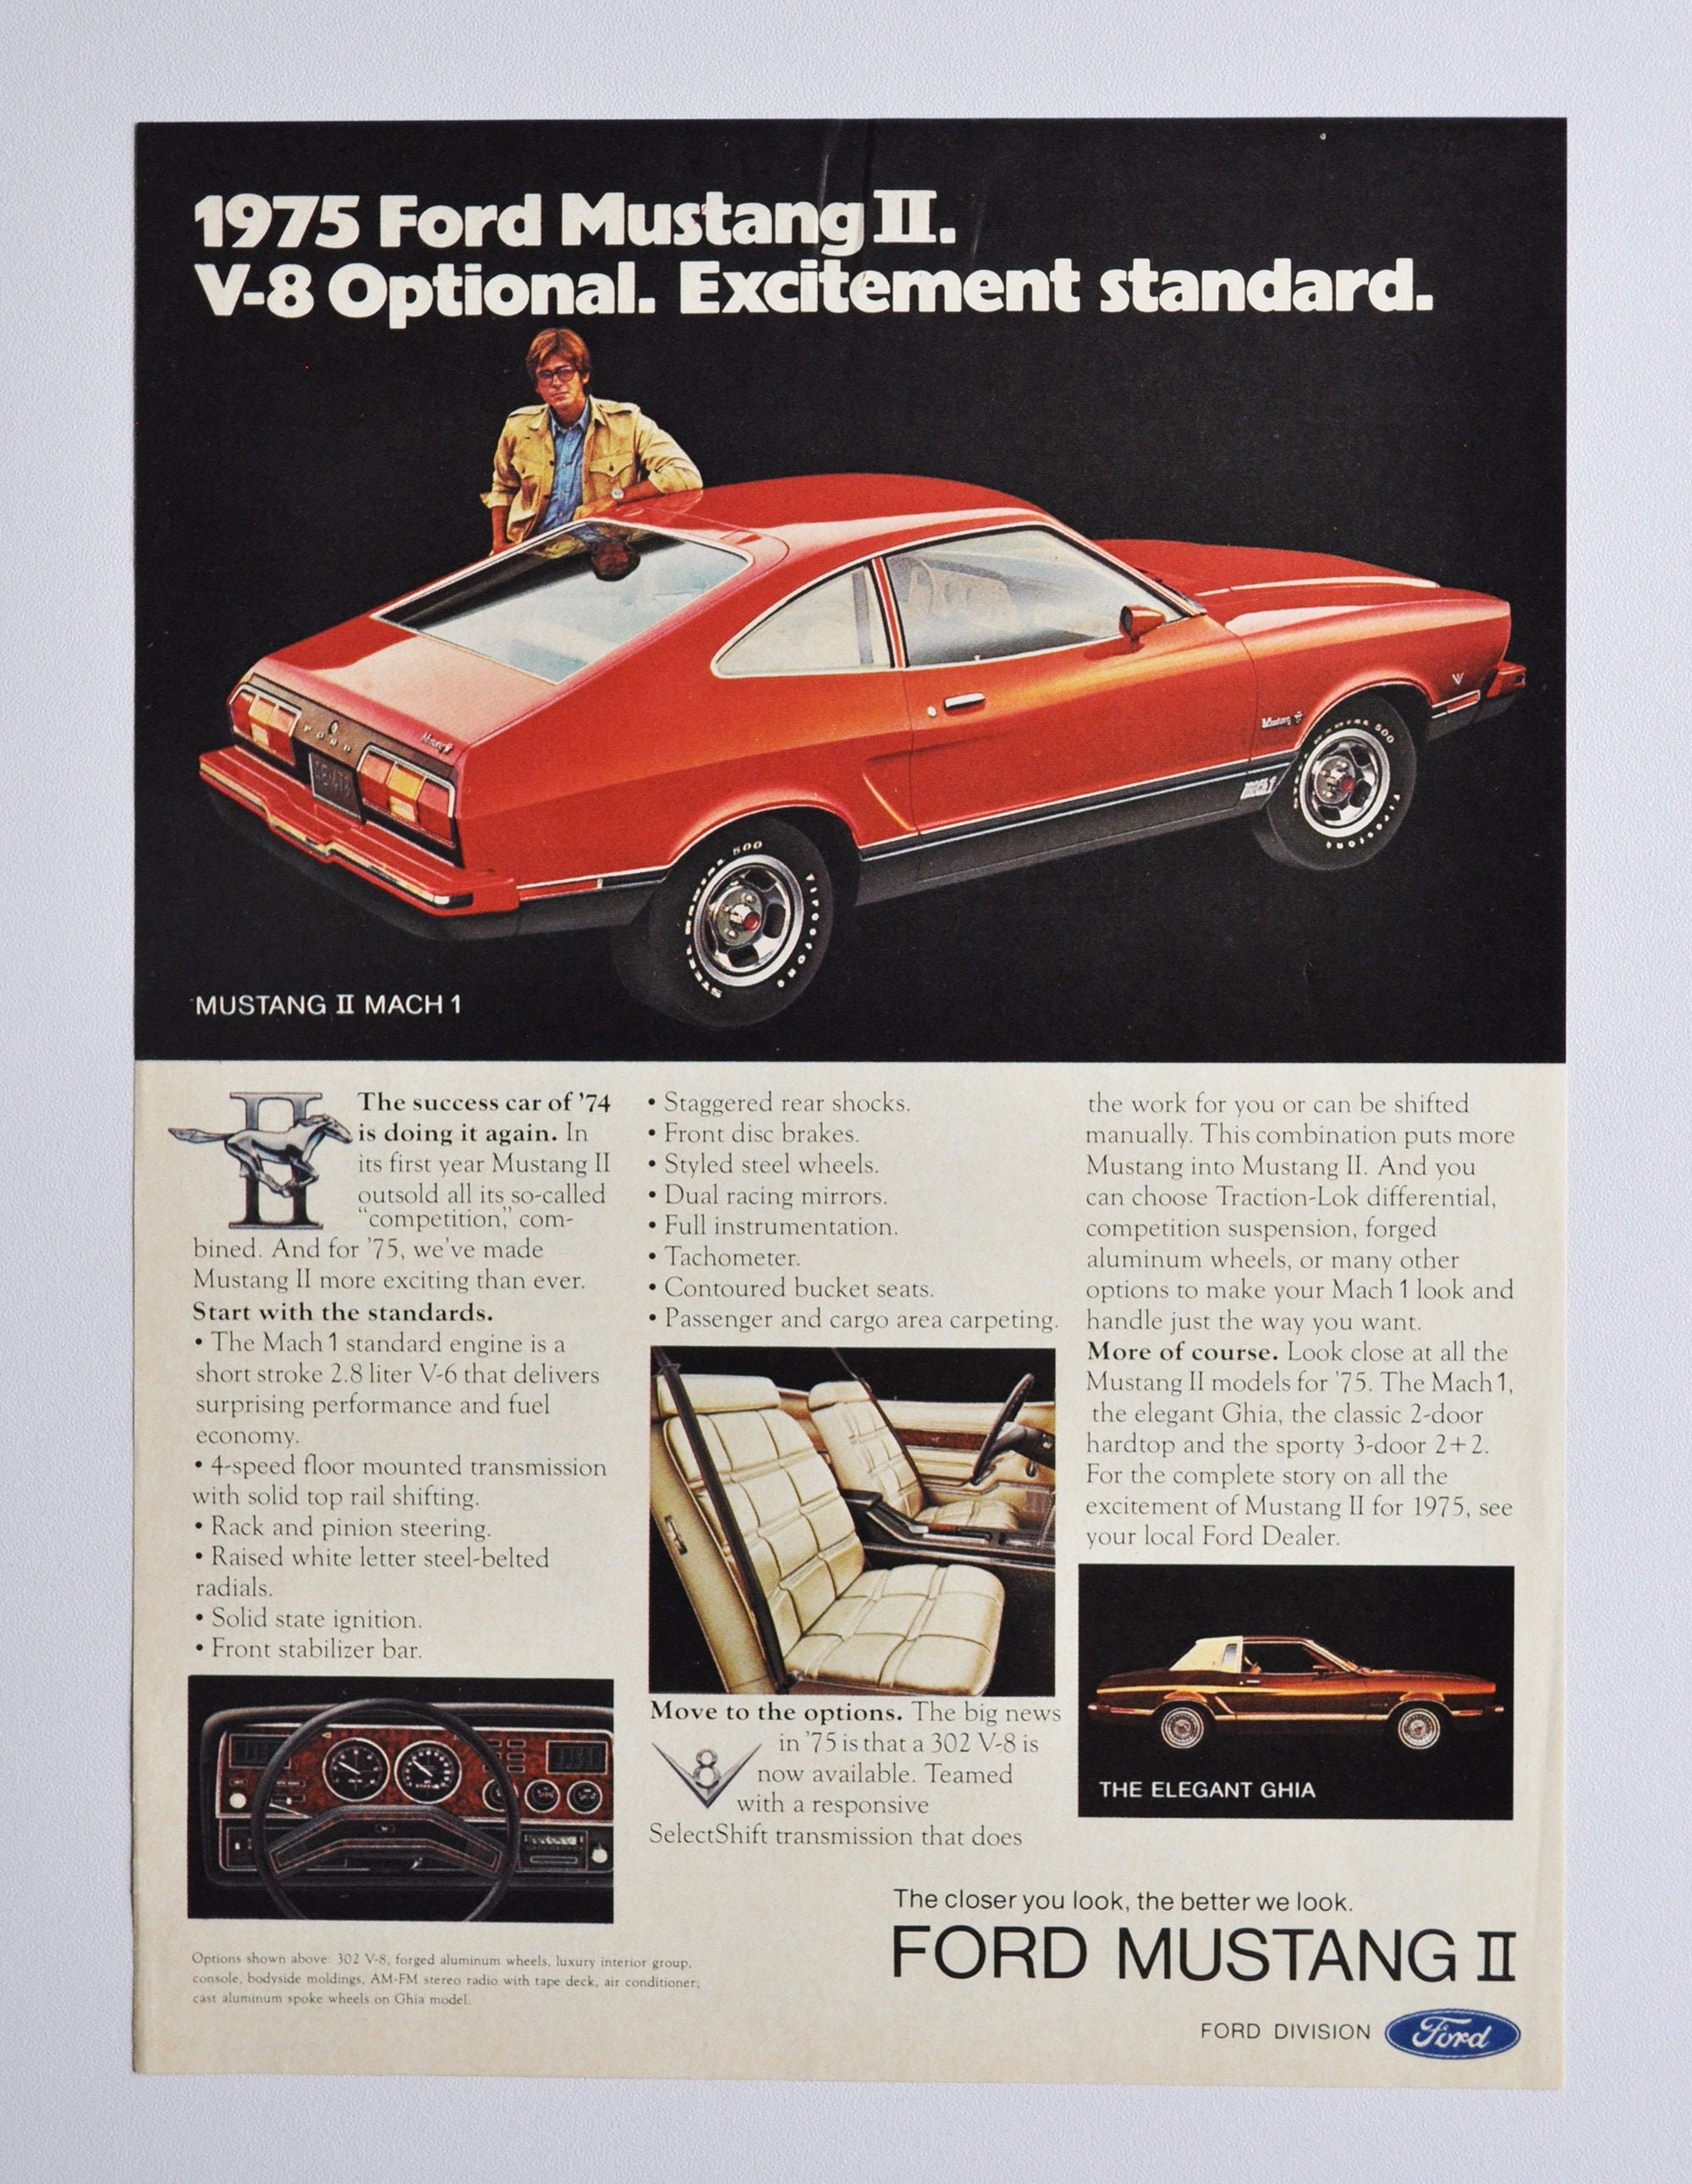 Car Ad 1975 Ford Mustang II 2 Mach 1 motor Company Classic - Etsy UK